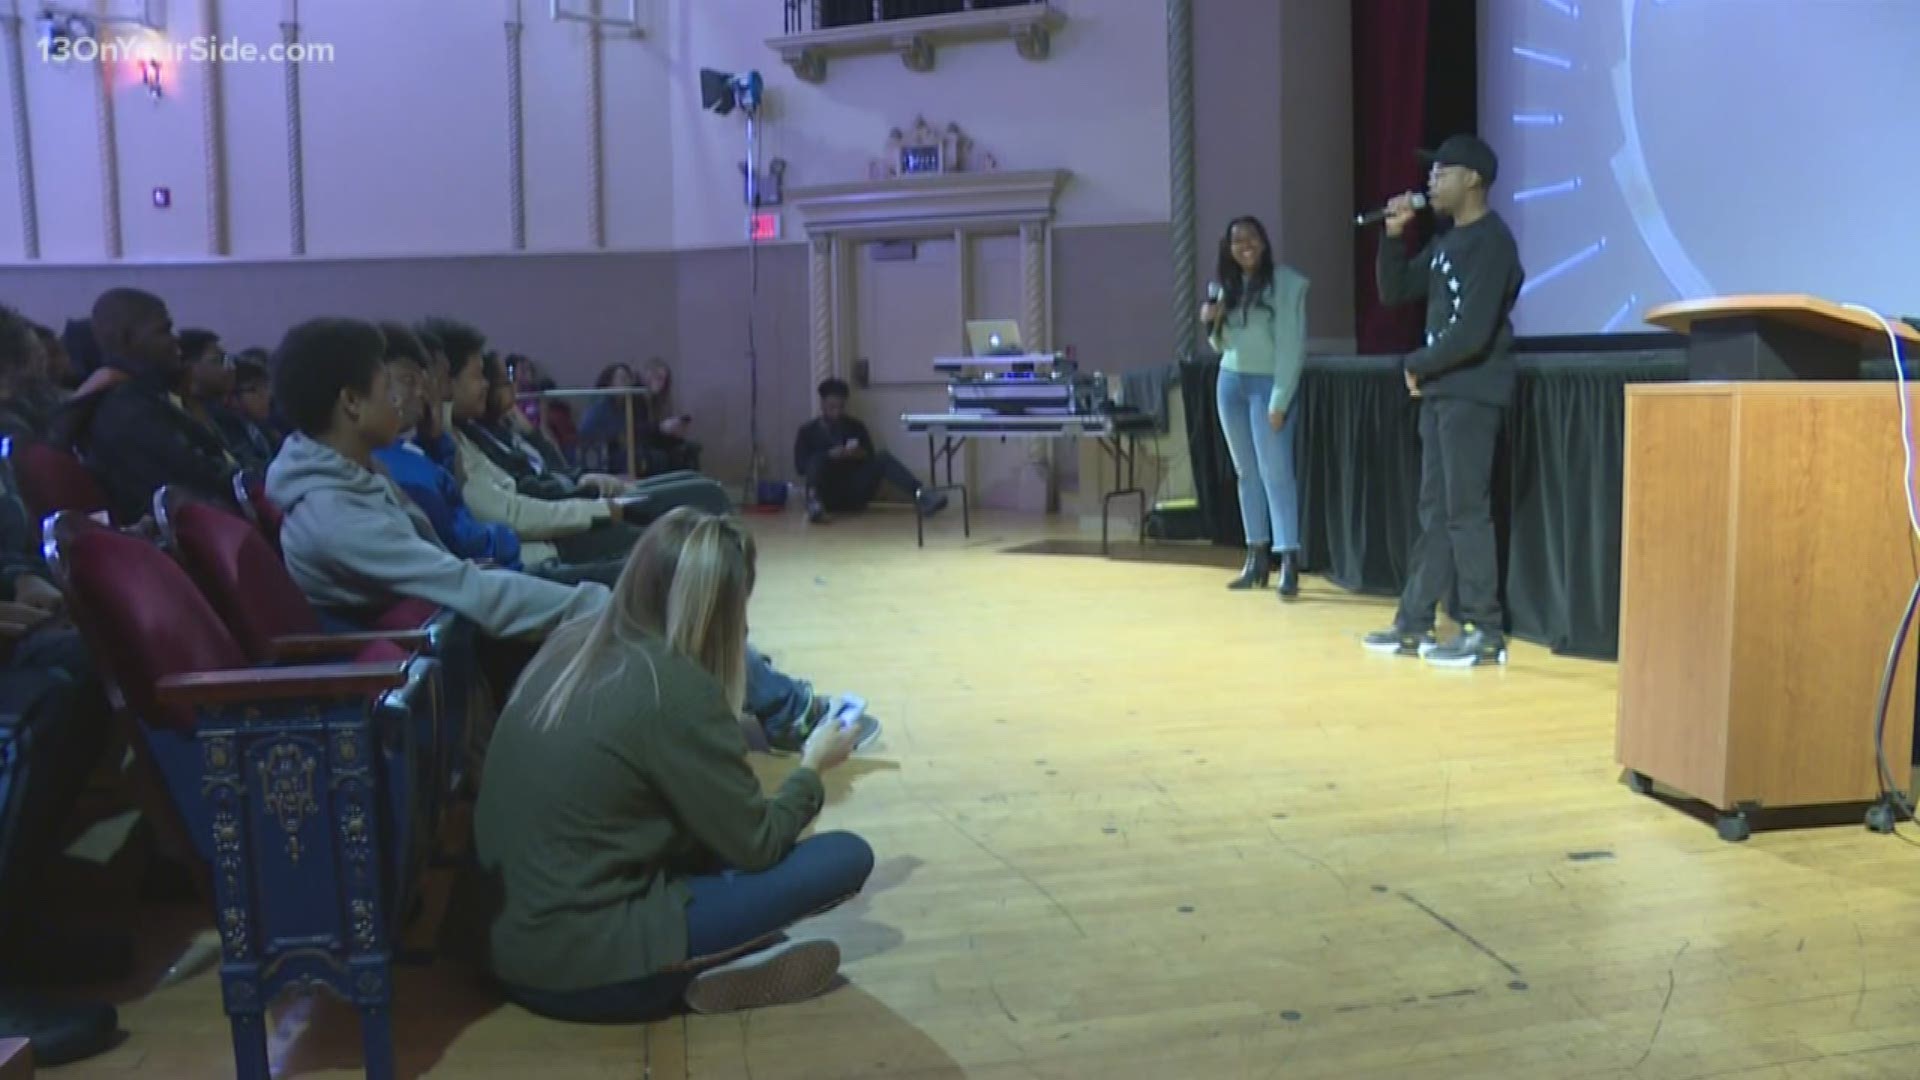 Nearly 300 students got to learn about digital media and 21st century career skills from a handful of internet stars.